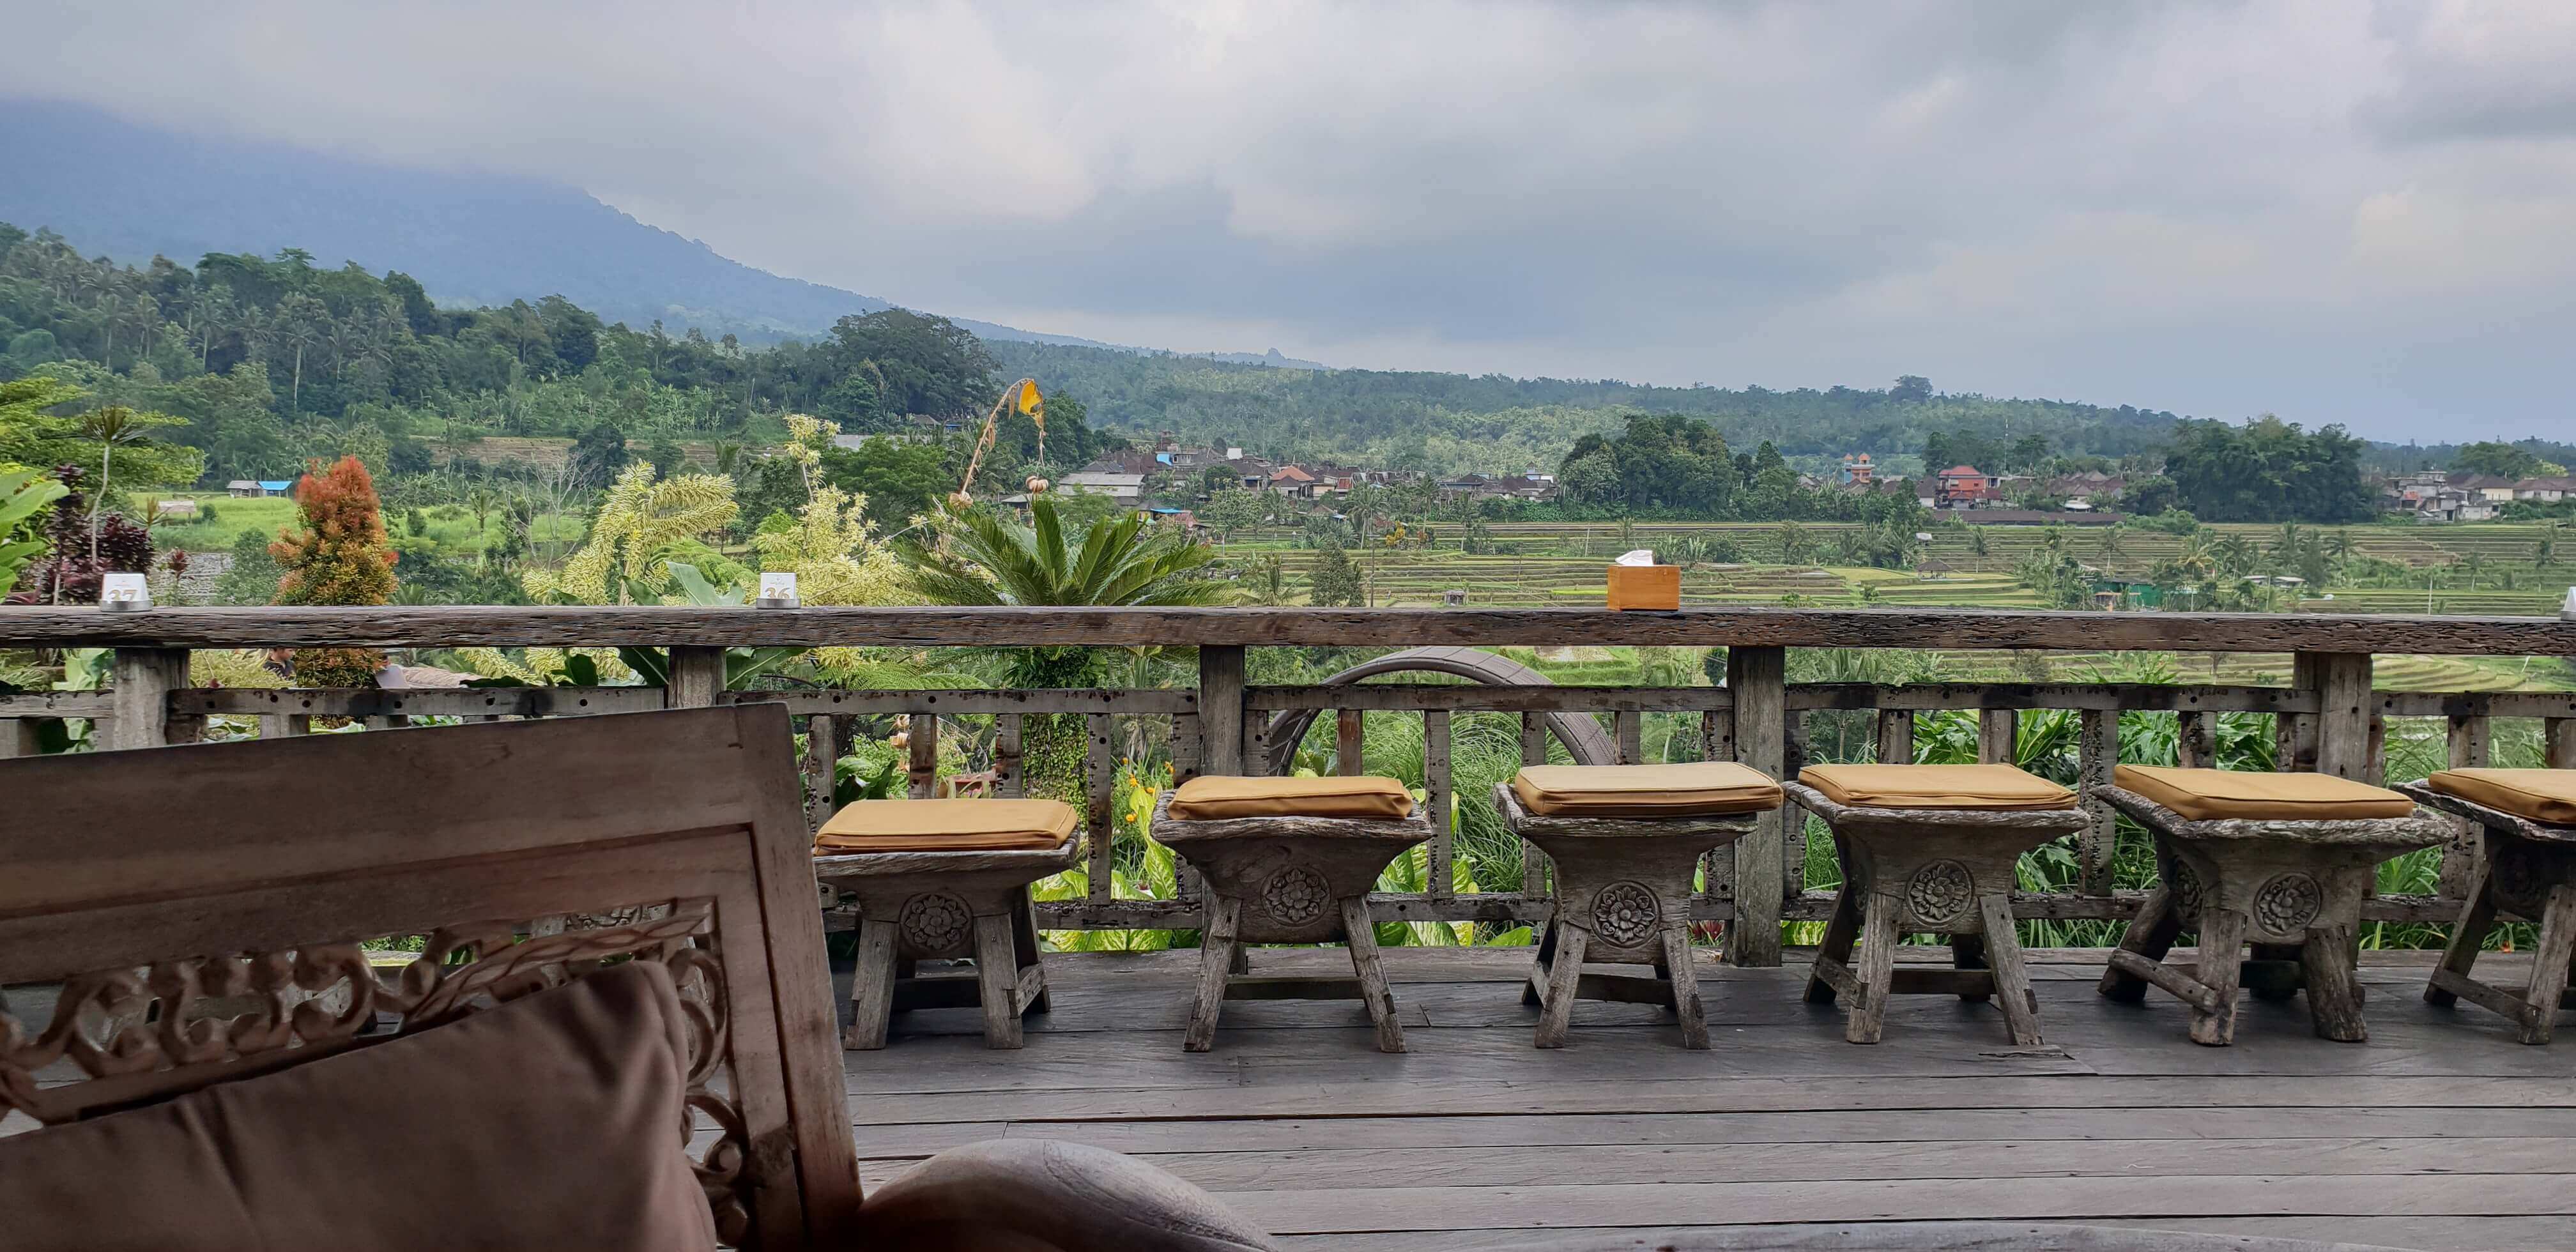 Gong Jatiluwih is the best place to enjoy a good meal with a scenic view